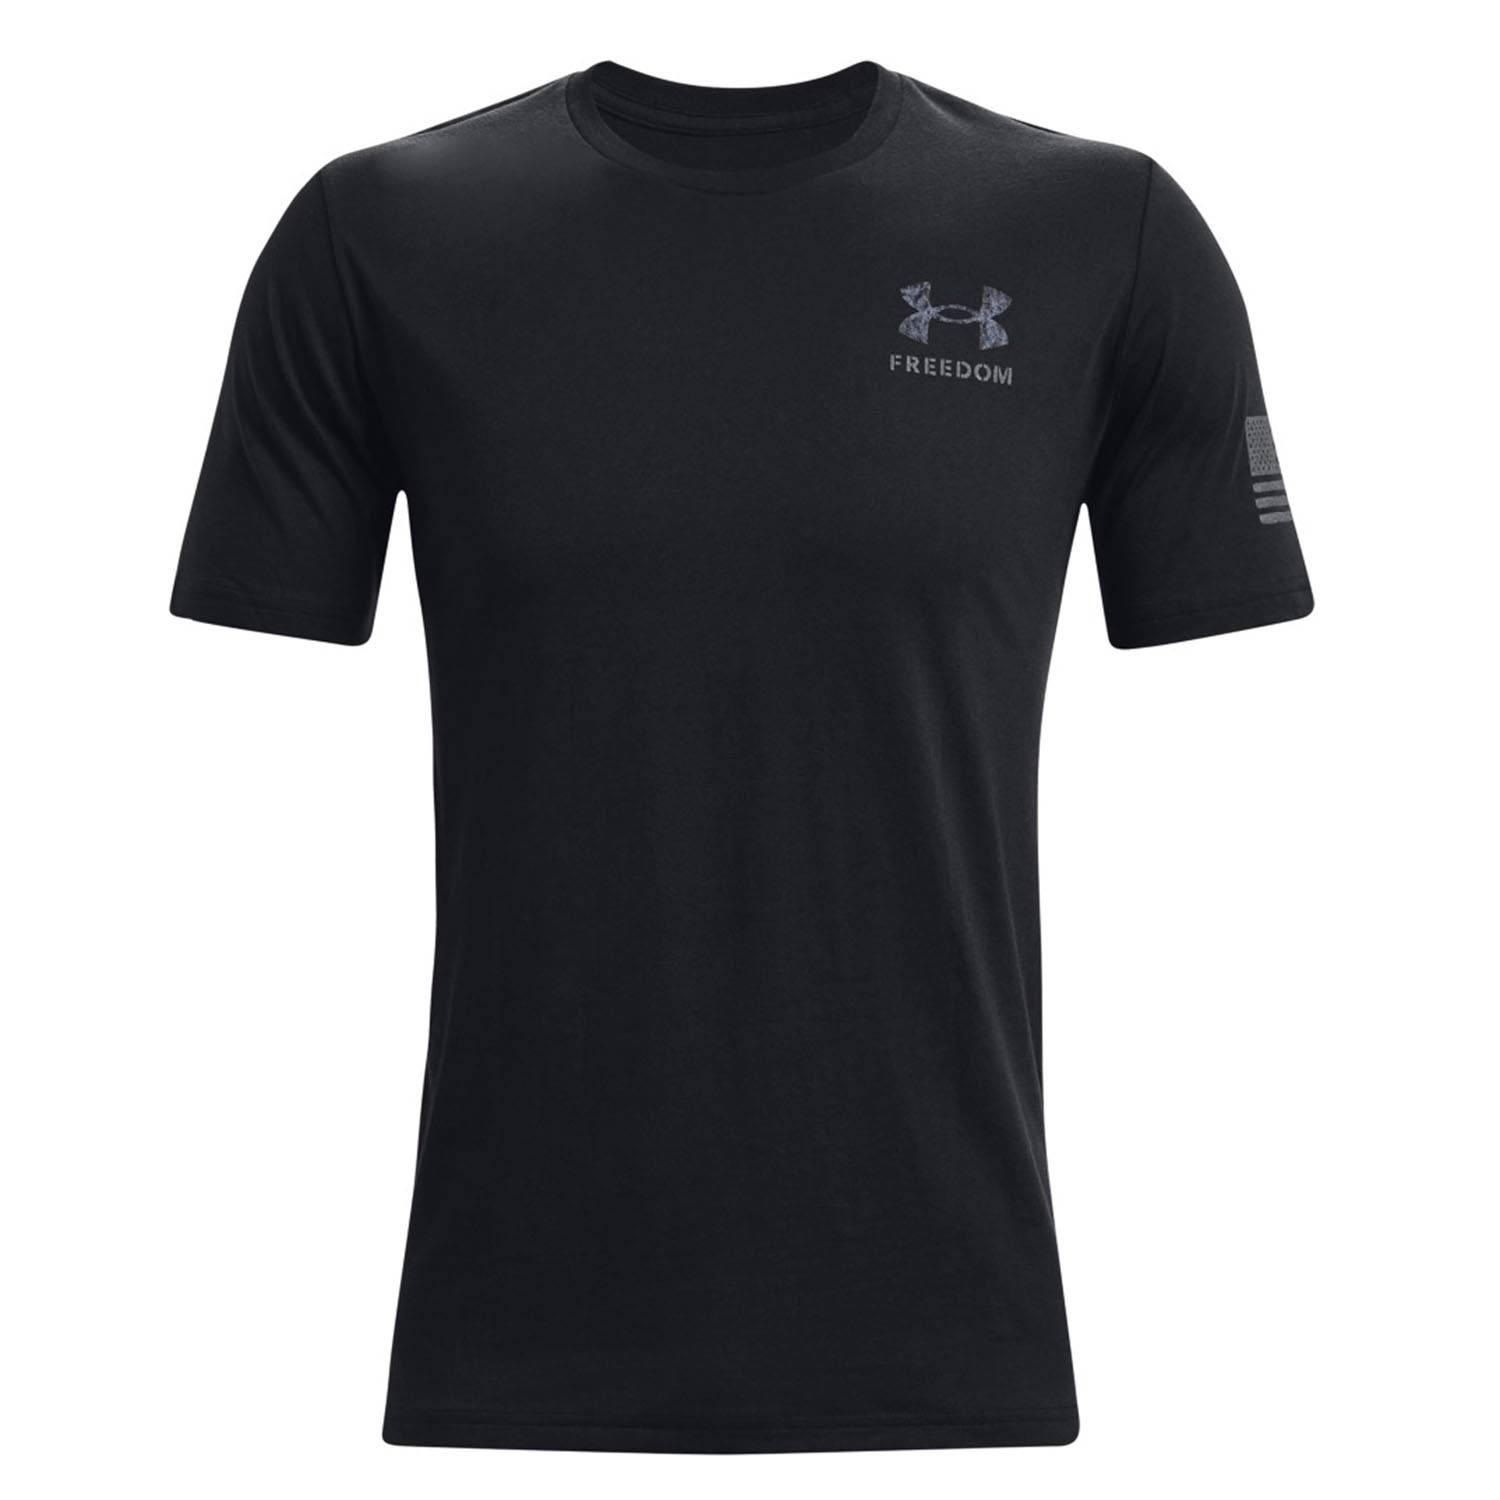 Under Armour Freedom by 1775 Graphic Tee